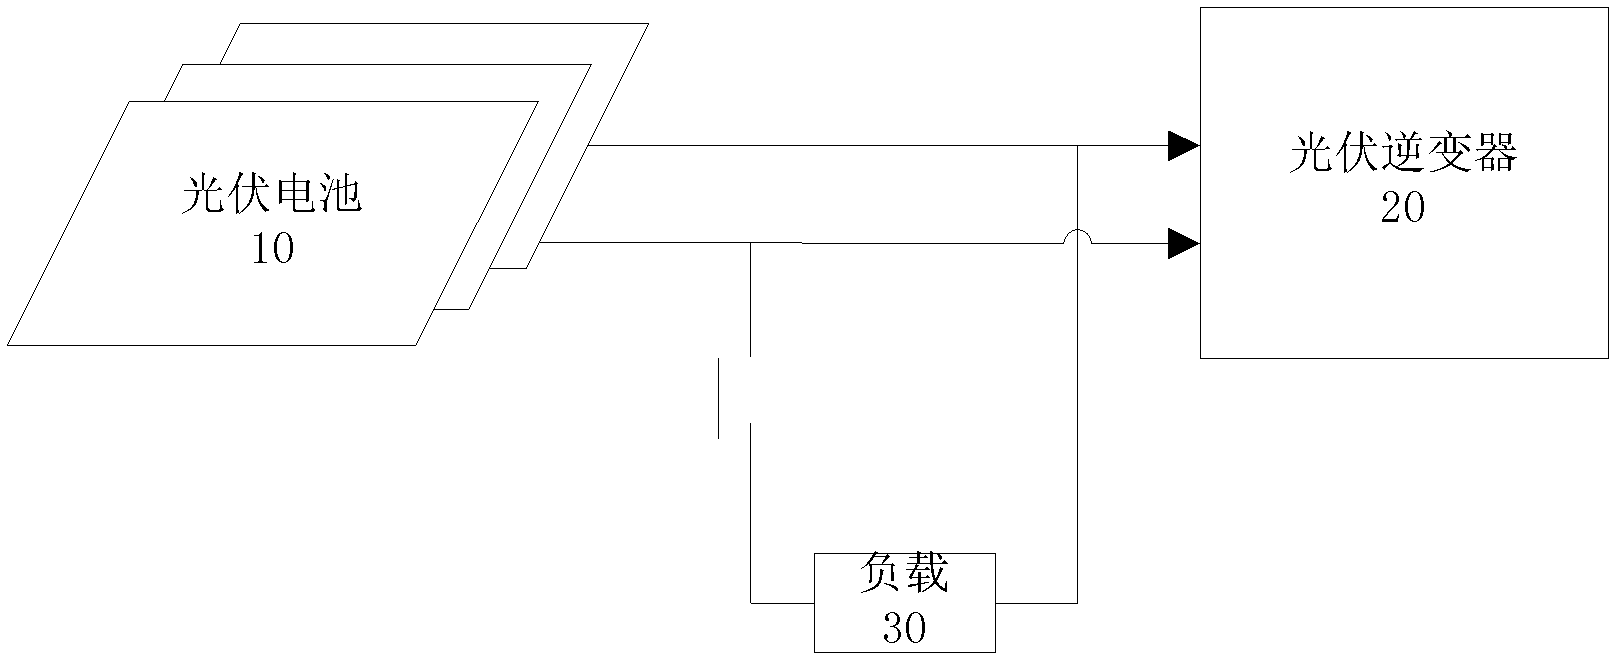 Startup control method and device for photovoltaic inverter